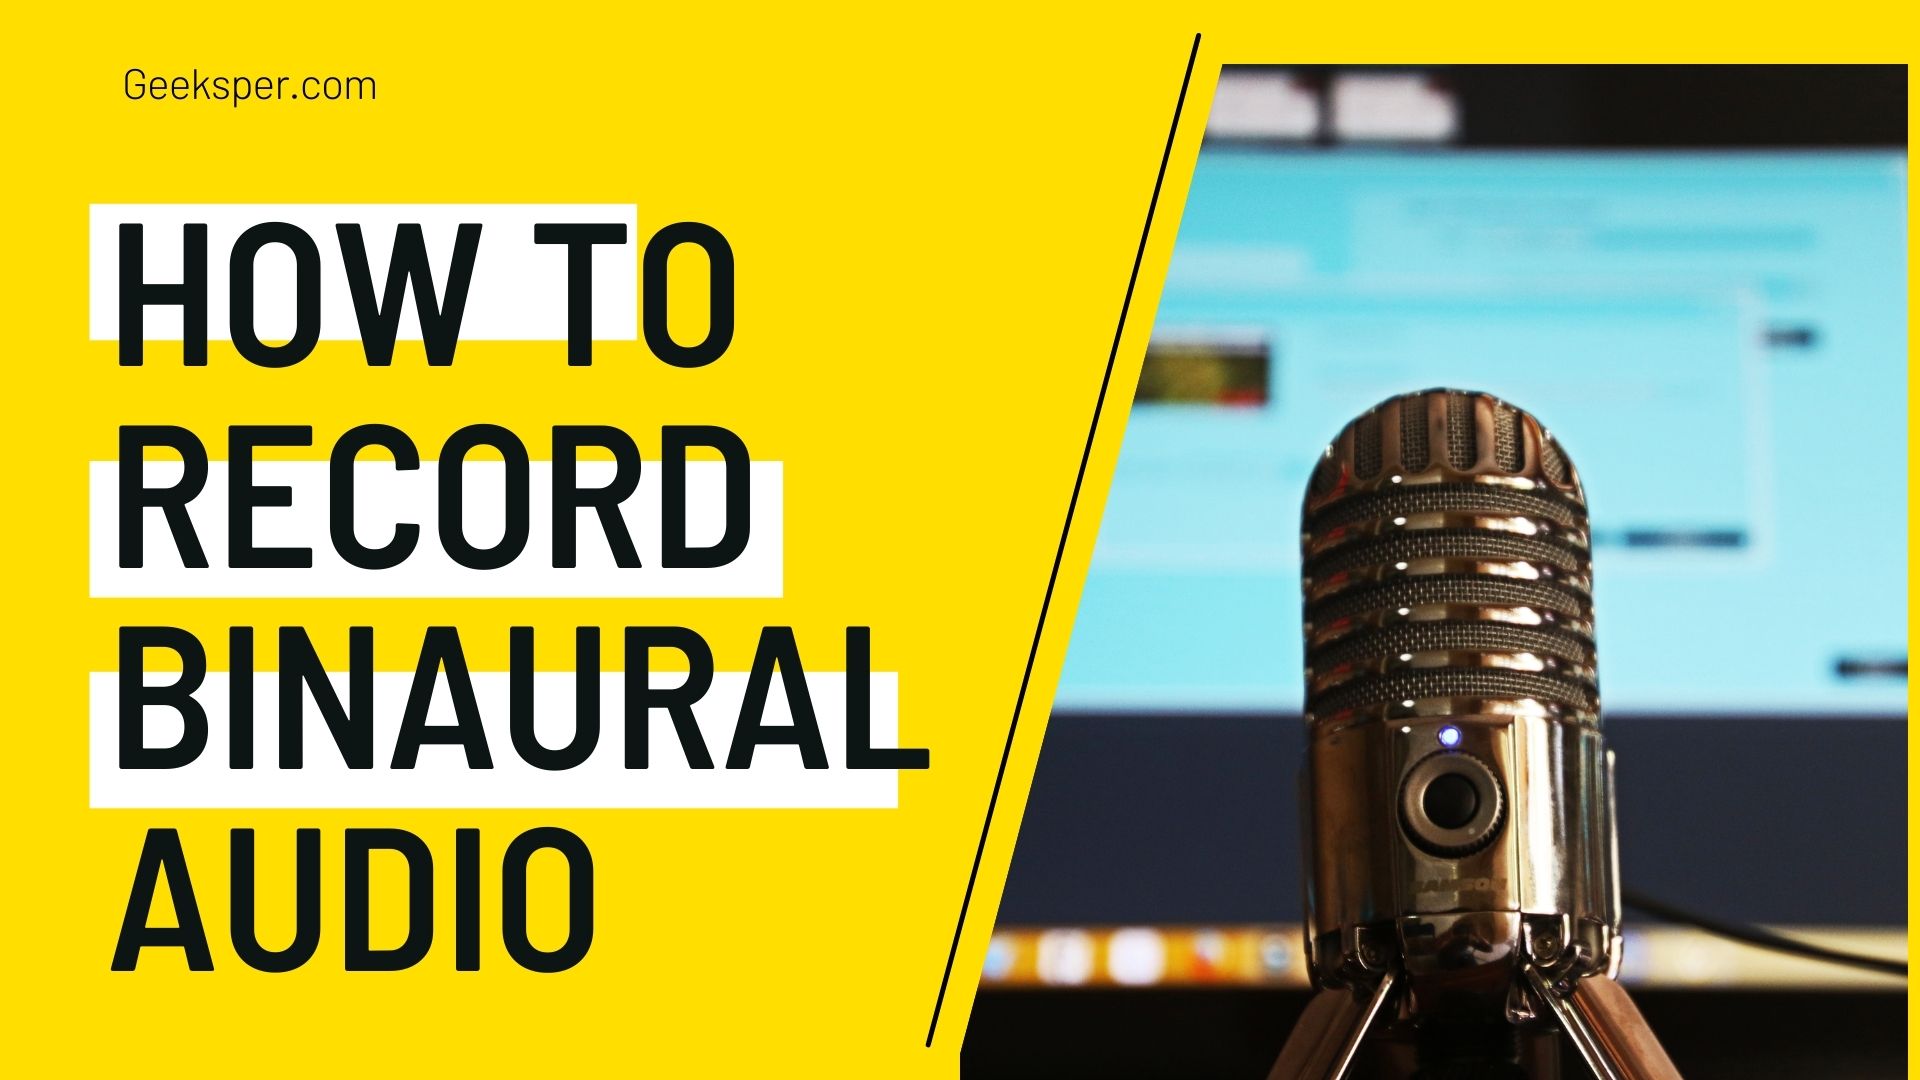 How to Record Binaural Audio